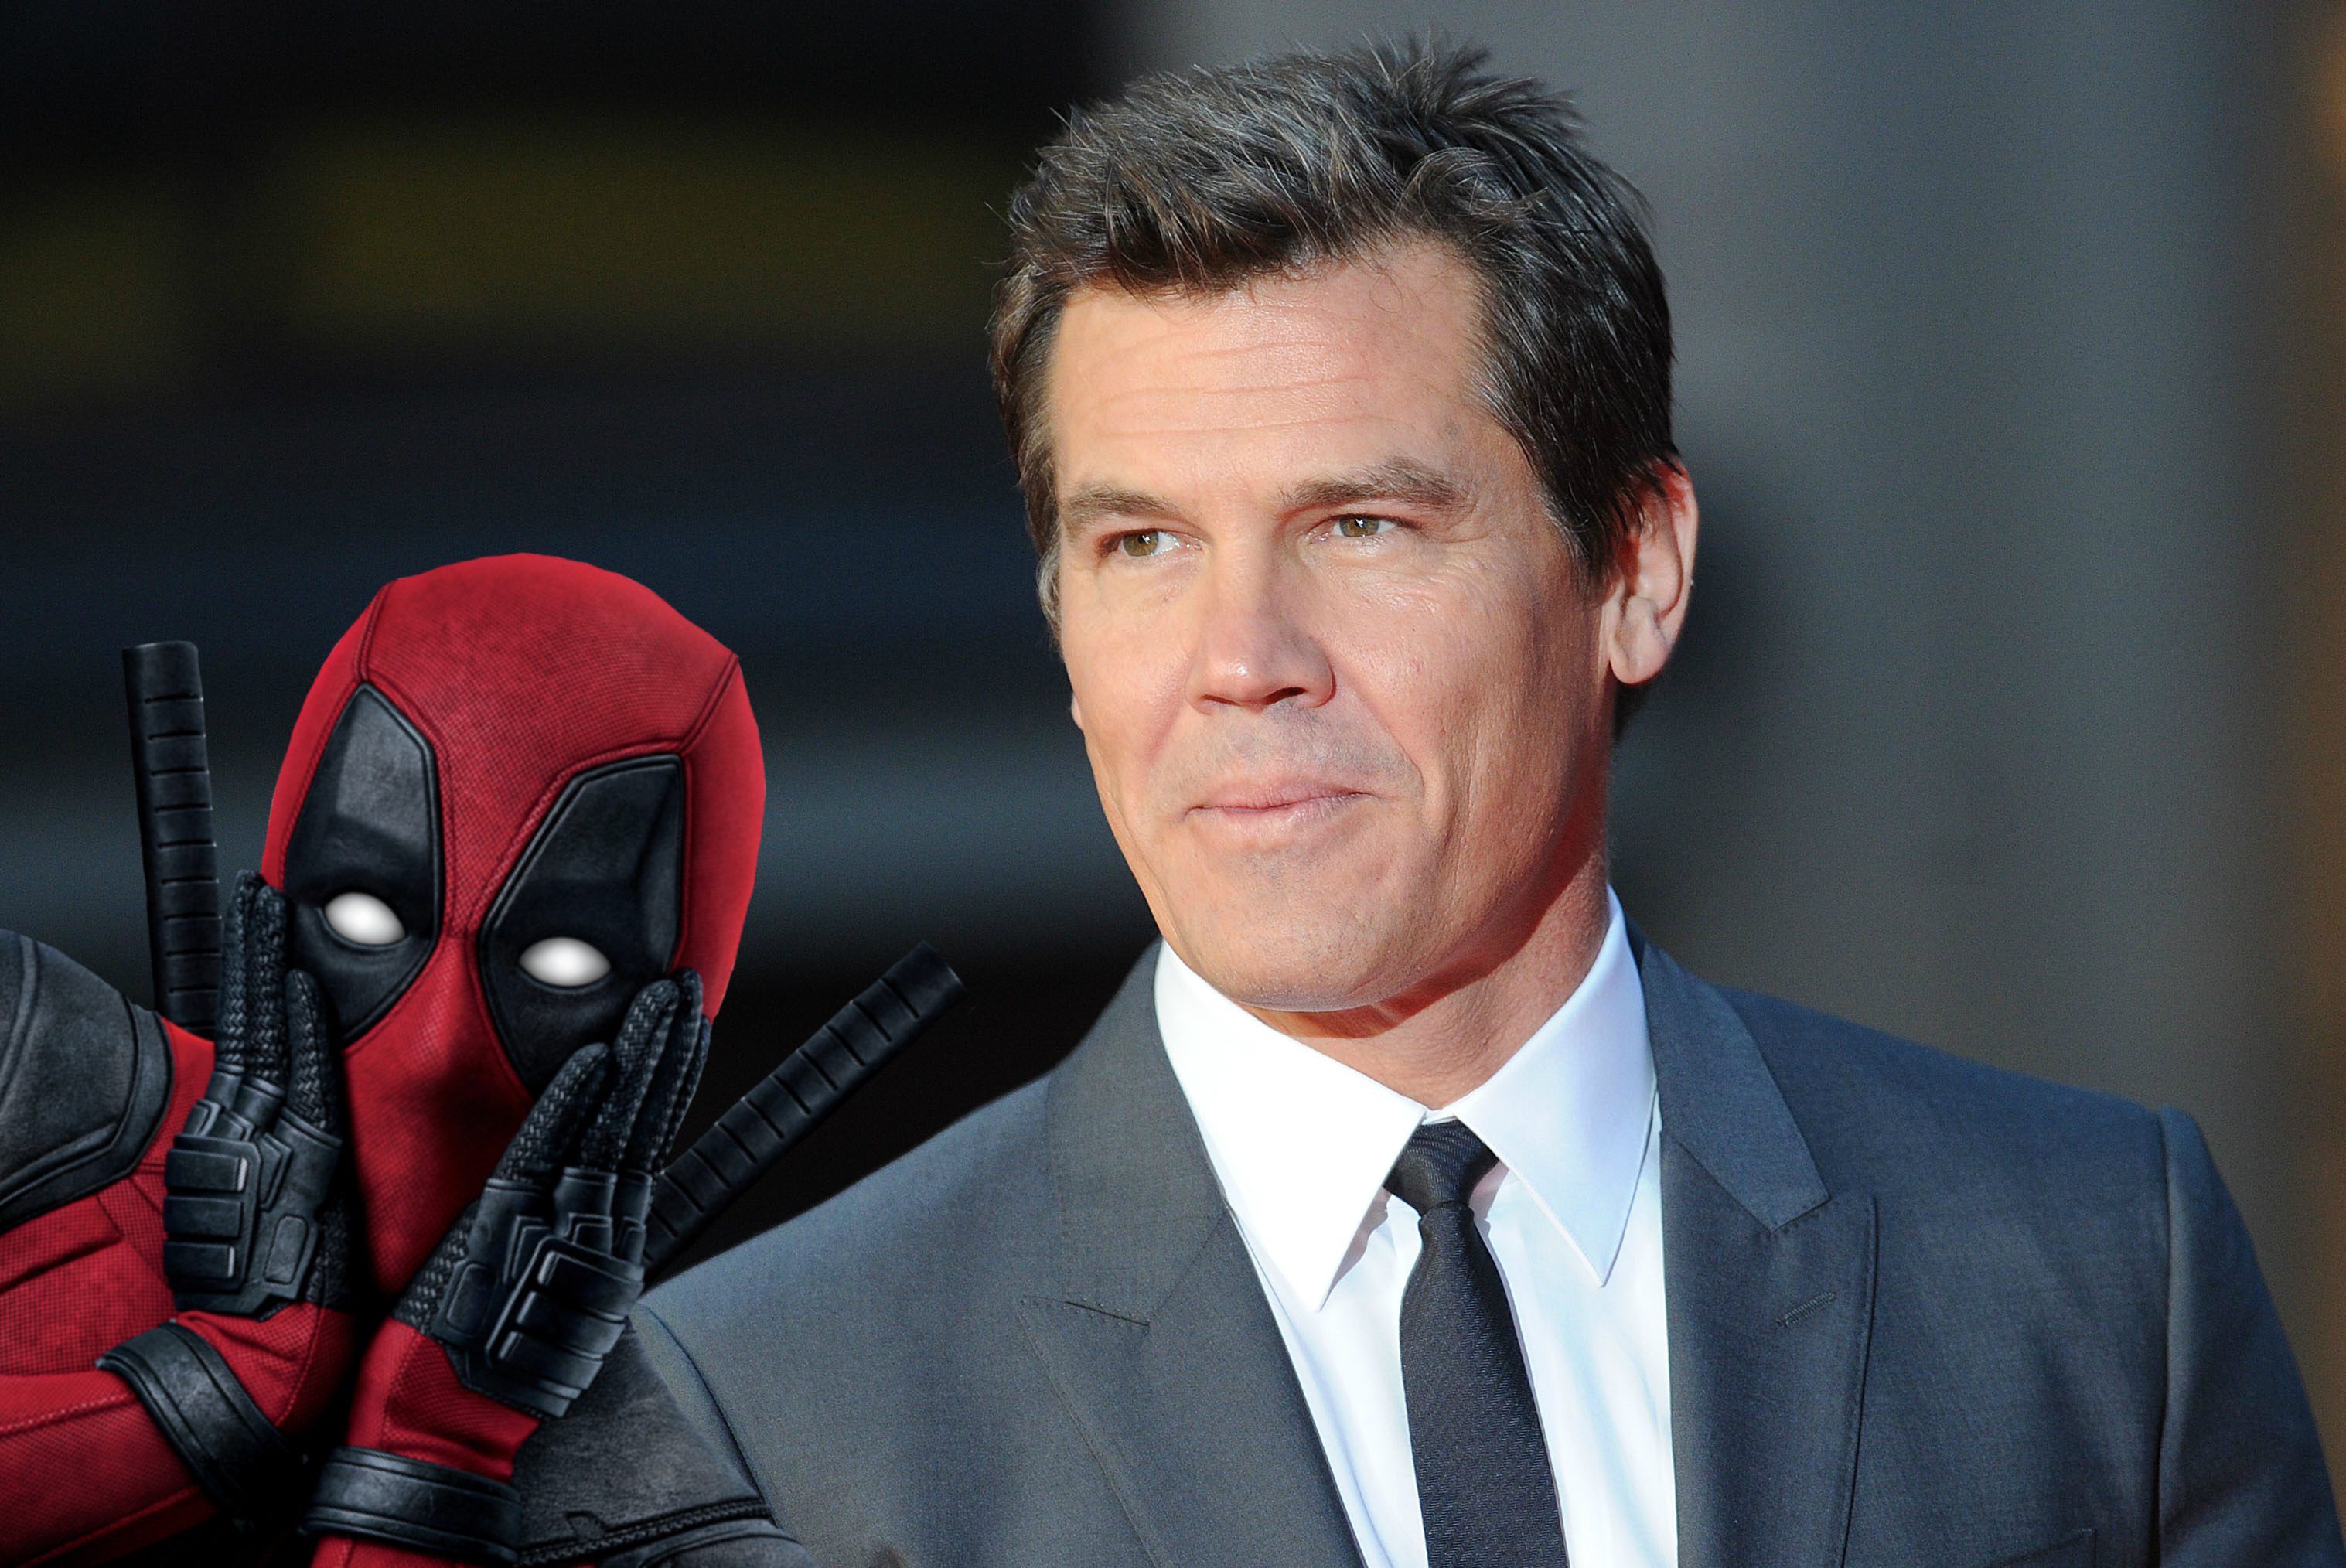 Josh Brolin Has Nabbed The Role of Cable in Deadpool 2